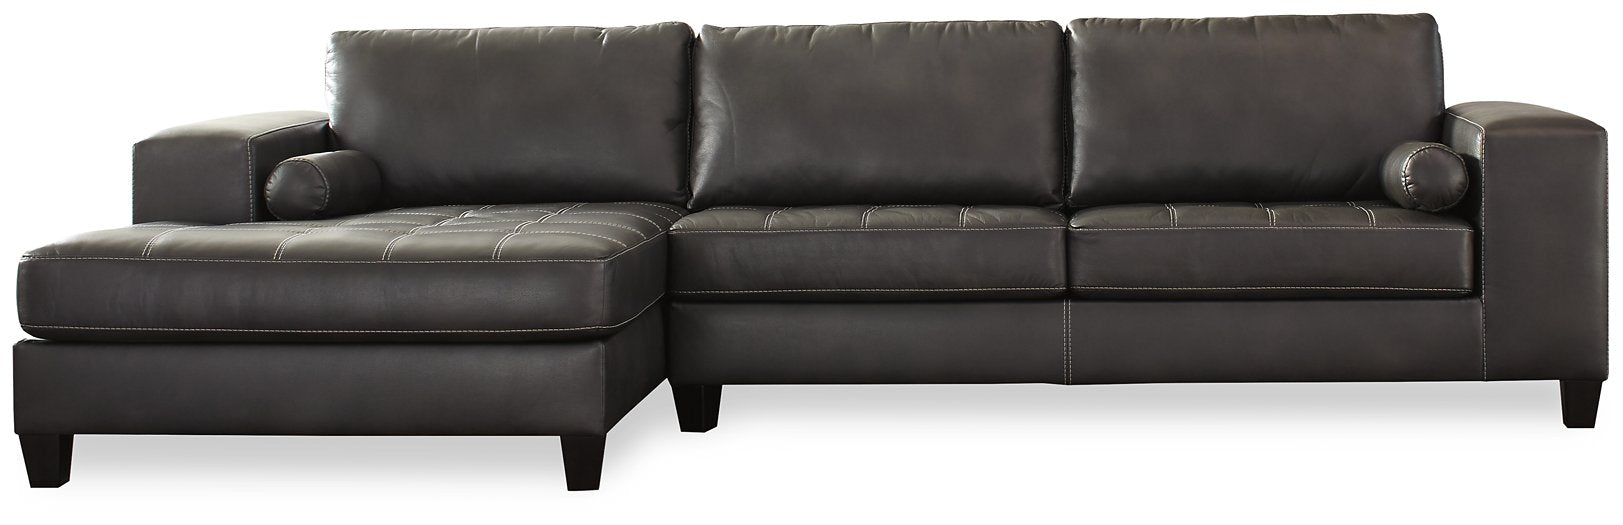 Nokomis 2-Piece Sectional with Chaise Sectional Ashley Furniture